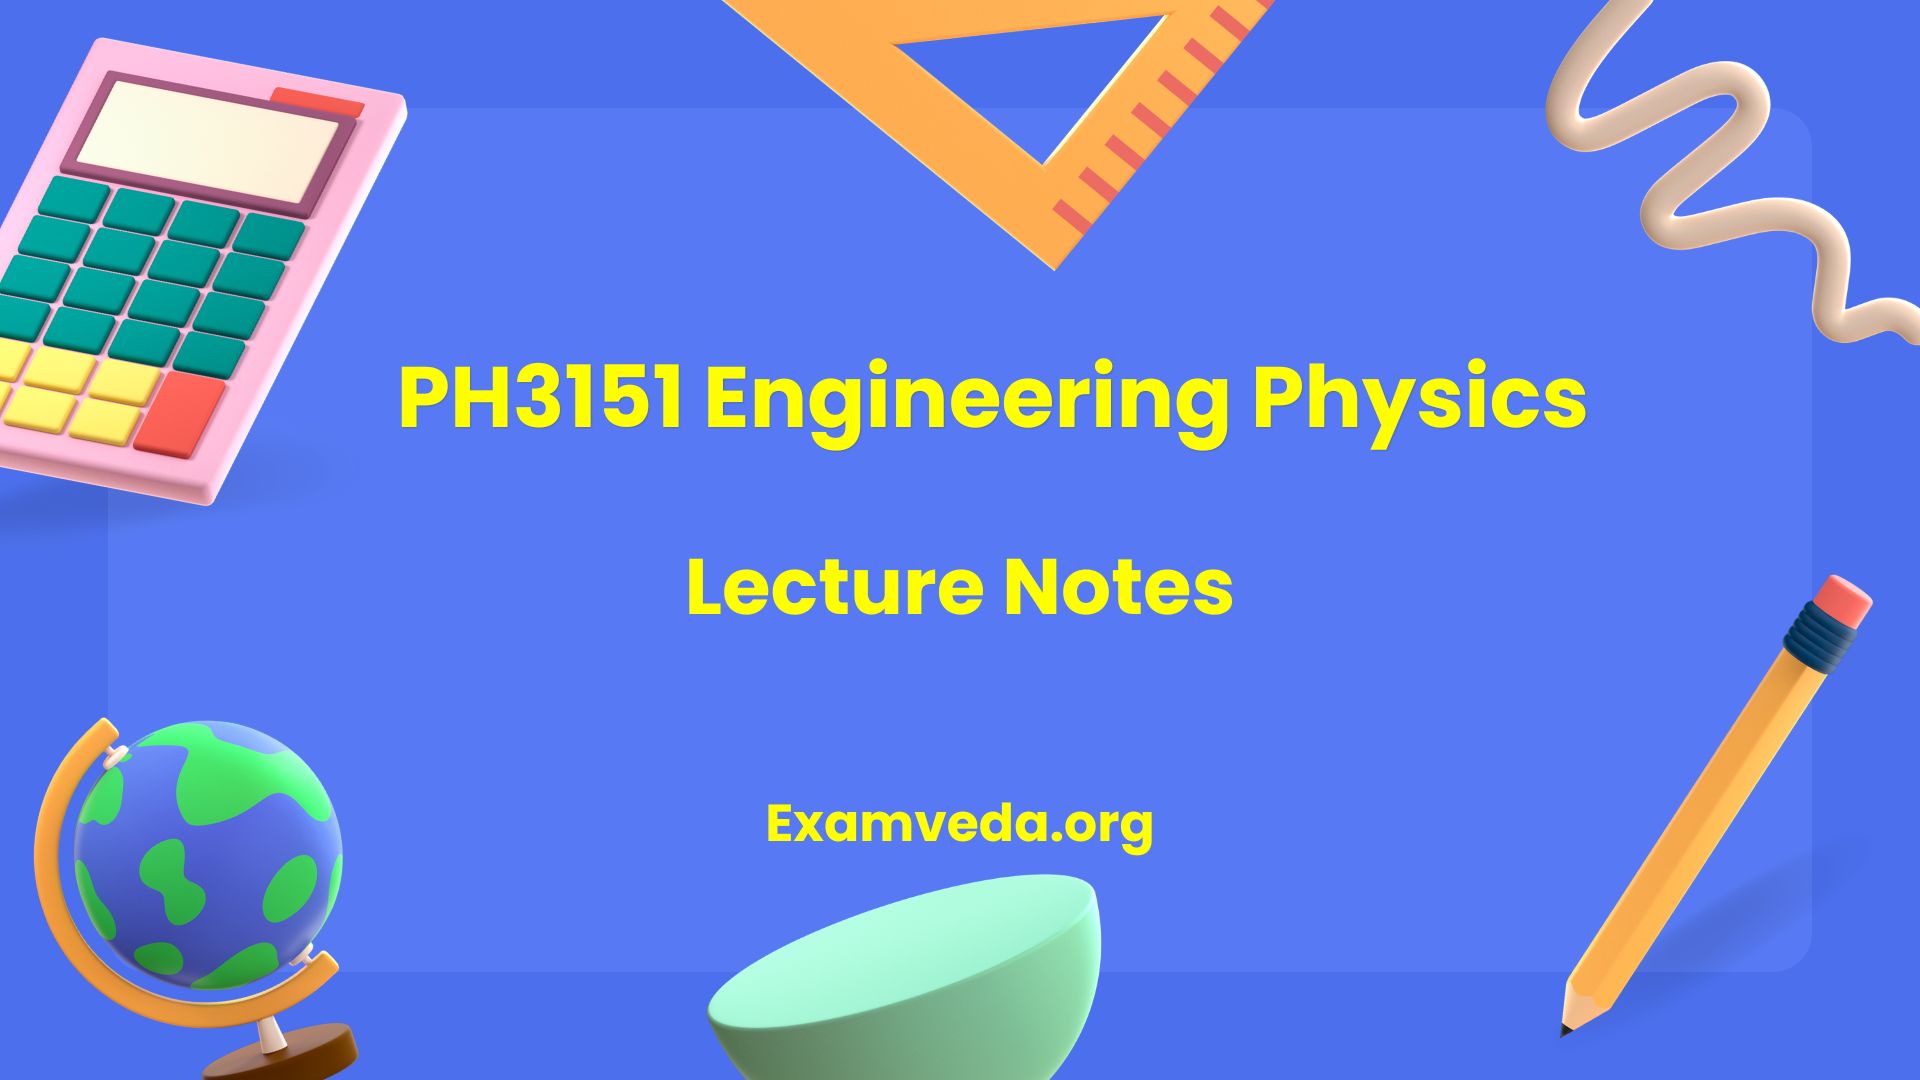 PH3151 Engineering Physics Lecture Notes